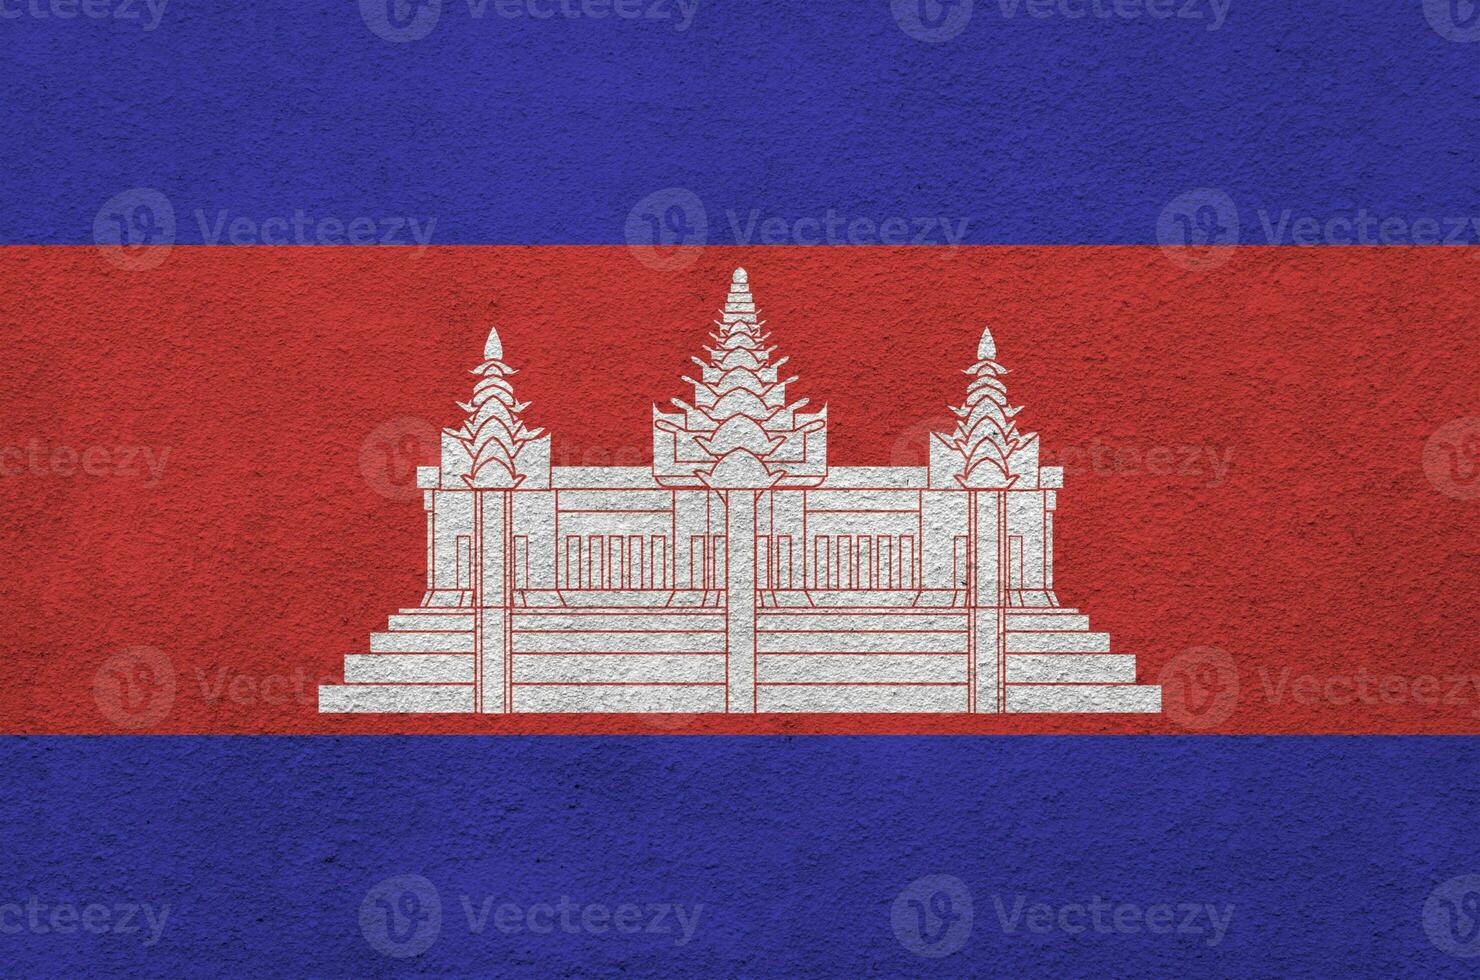 Cambodia flag depicted in bright paint colors on old relief plastering wall. Textured banner on rough background photo